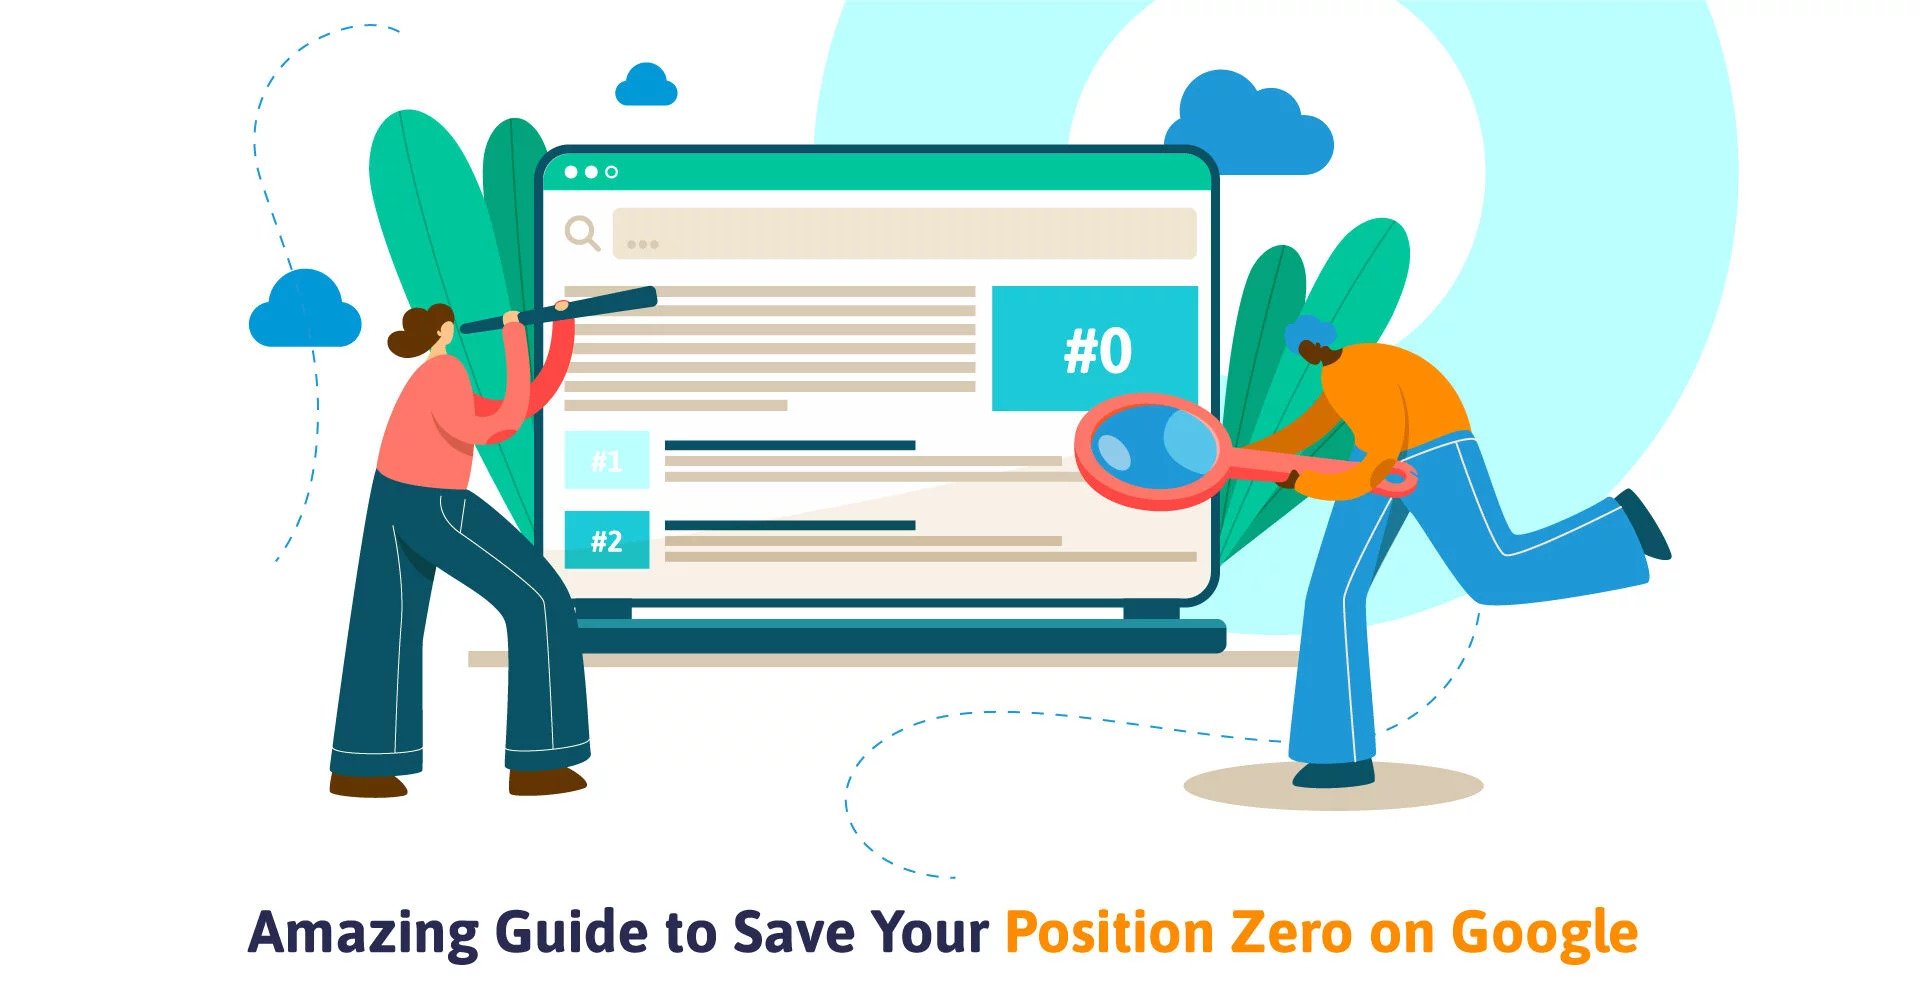 Amazing Guide to Save Your Position Zero on Google